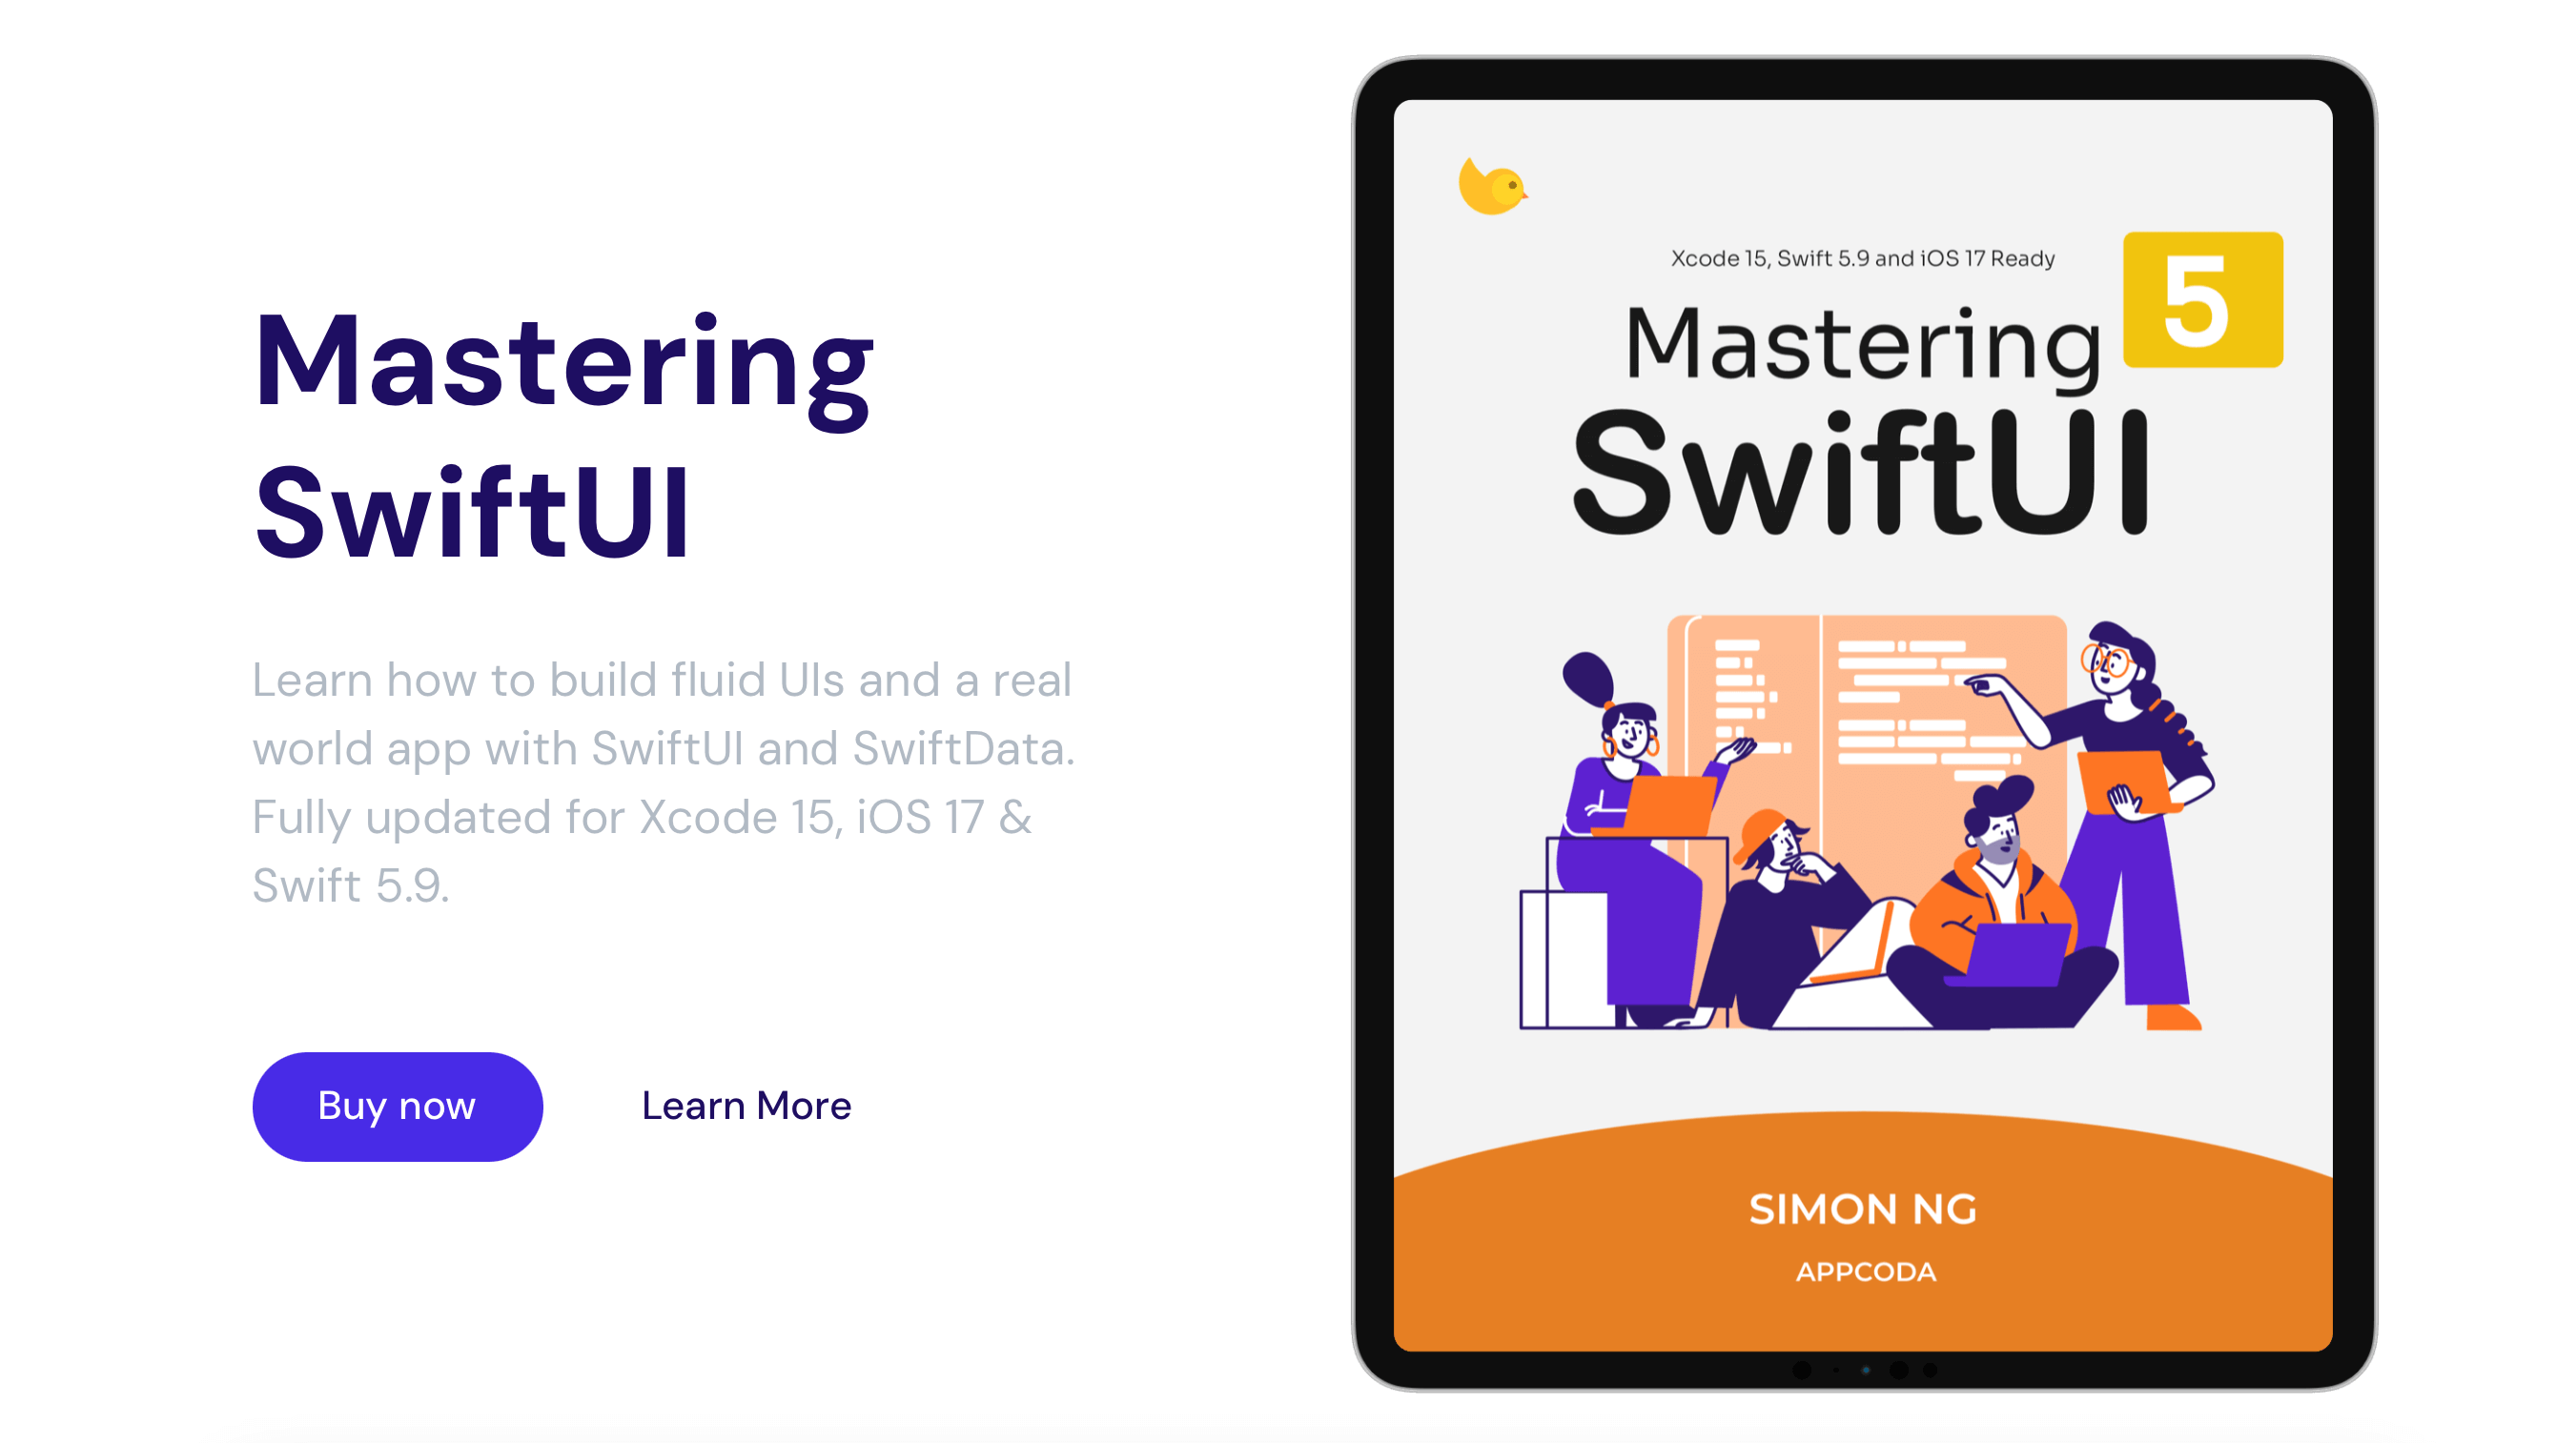 Mastering SwiftUI for iOS 17 and Xcode 15 is now Released